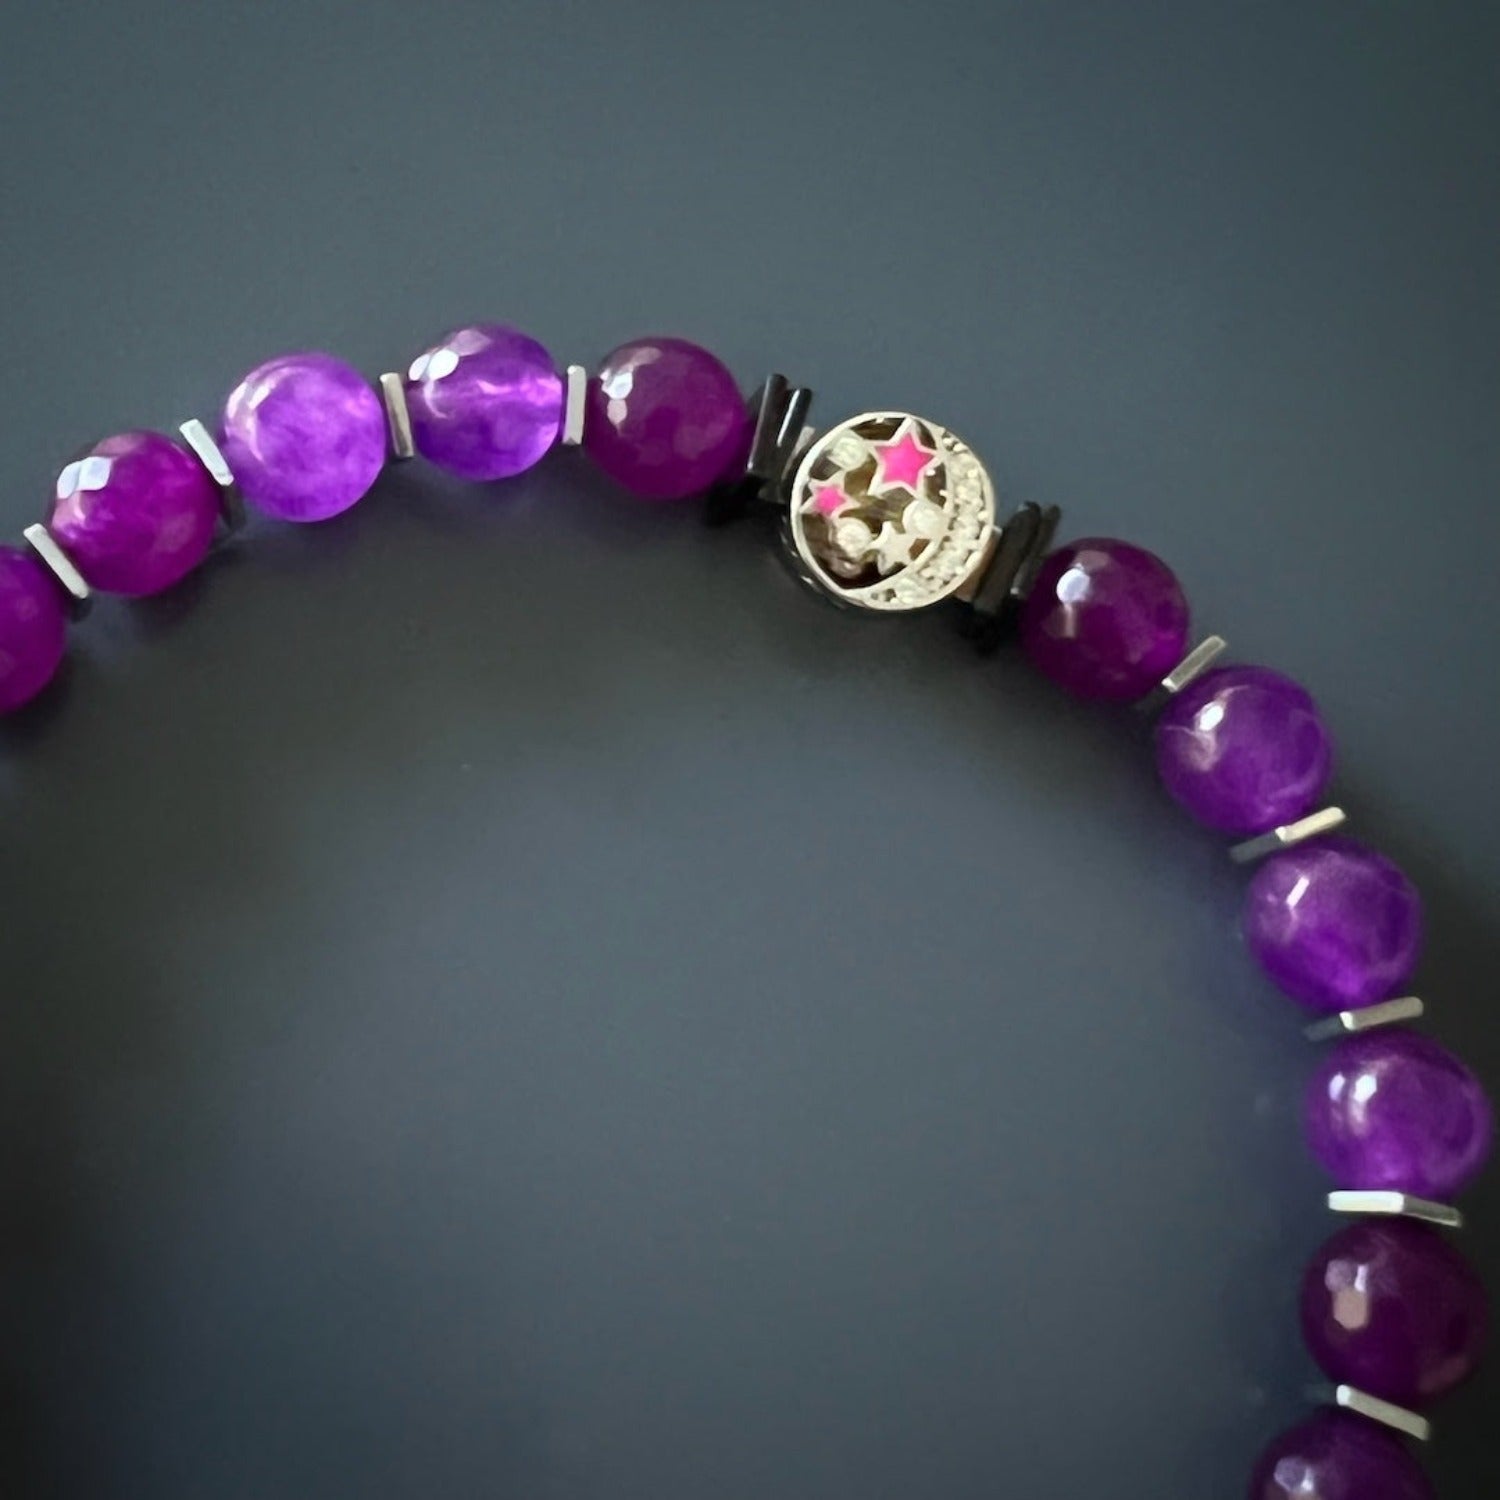 Stunning ankle bracelet adorned with purple jade beads and a silver dragonfly charm.